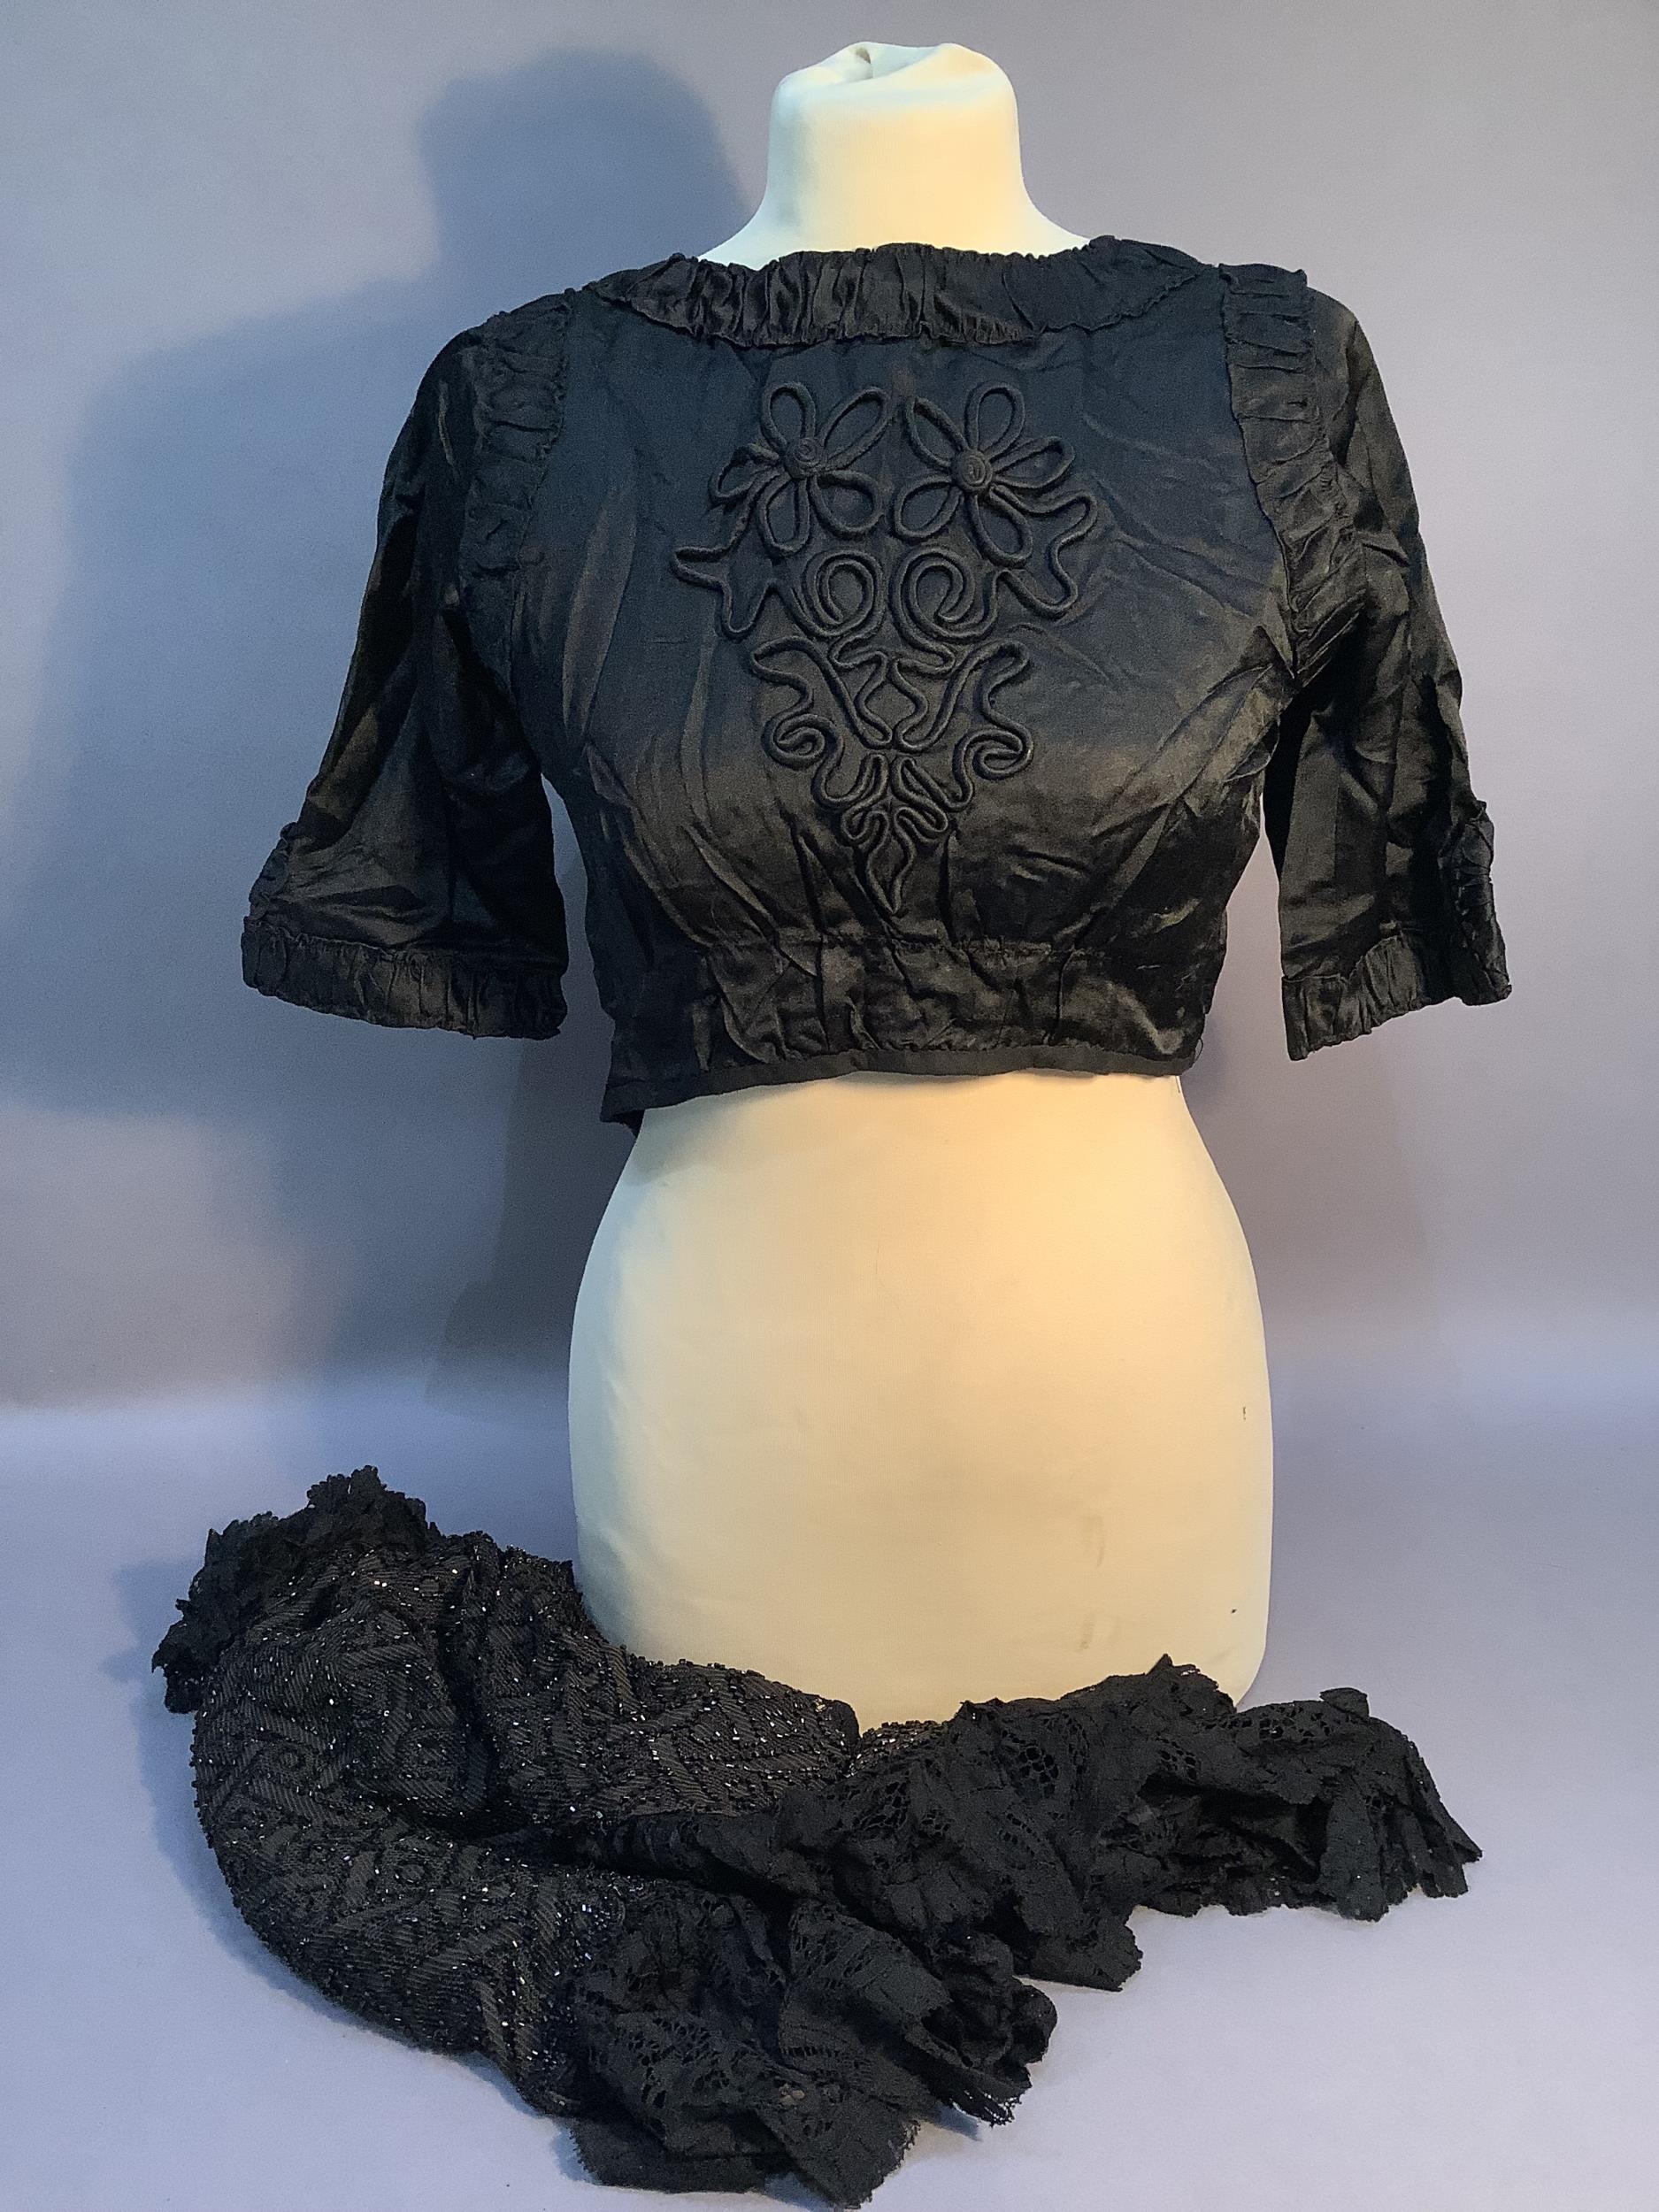 A Victorian dark brown and beaded cape with black lace trim together with a black ruched dress